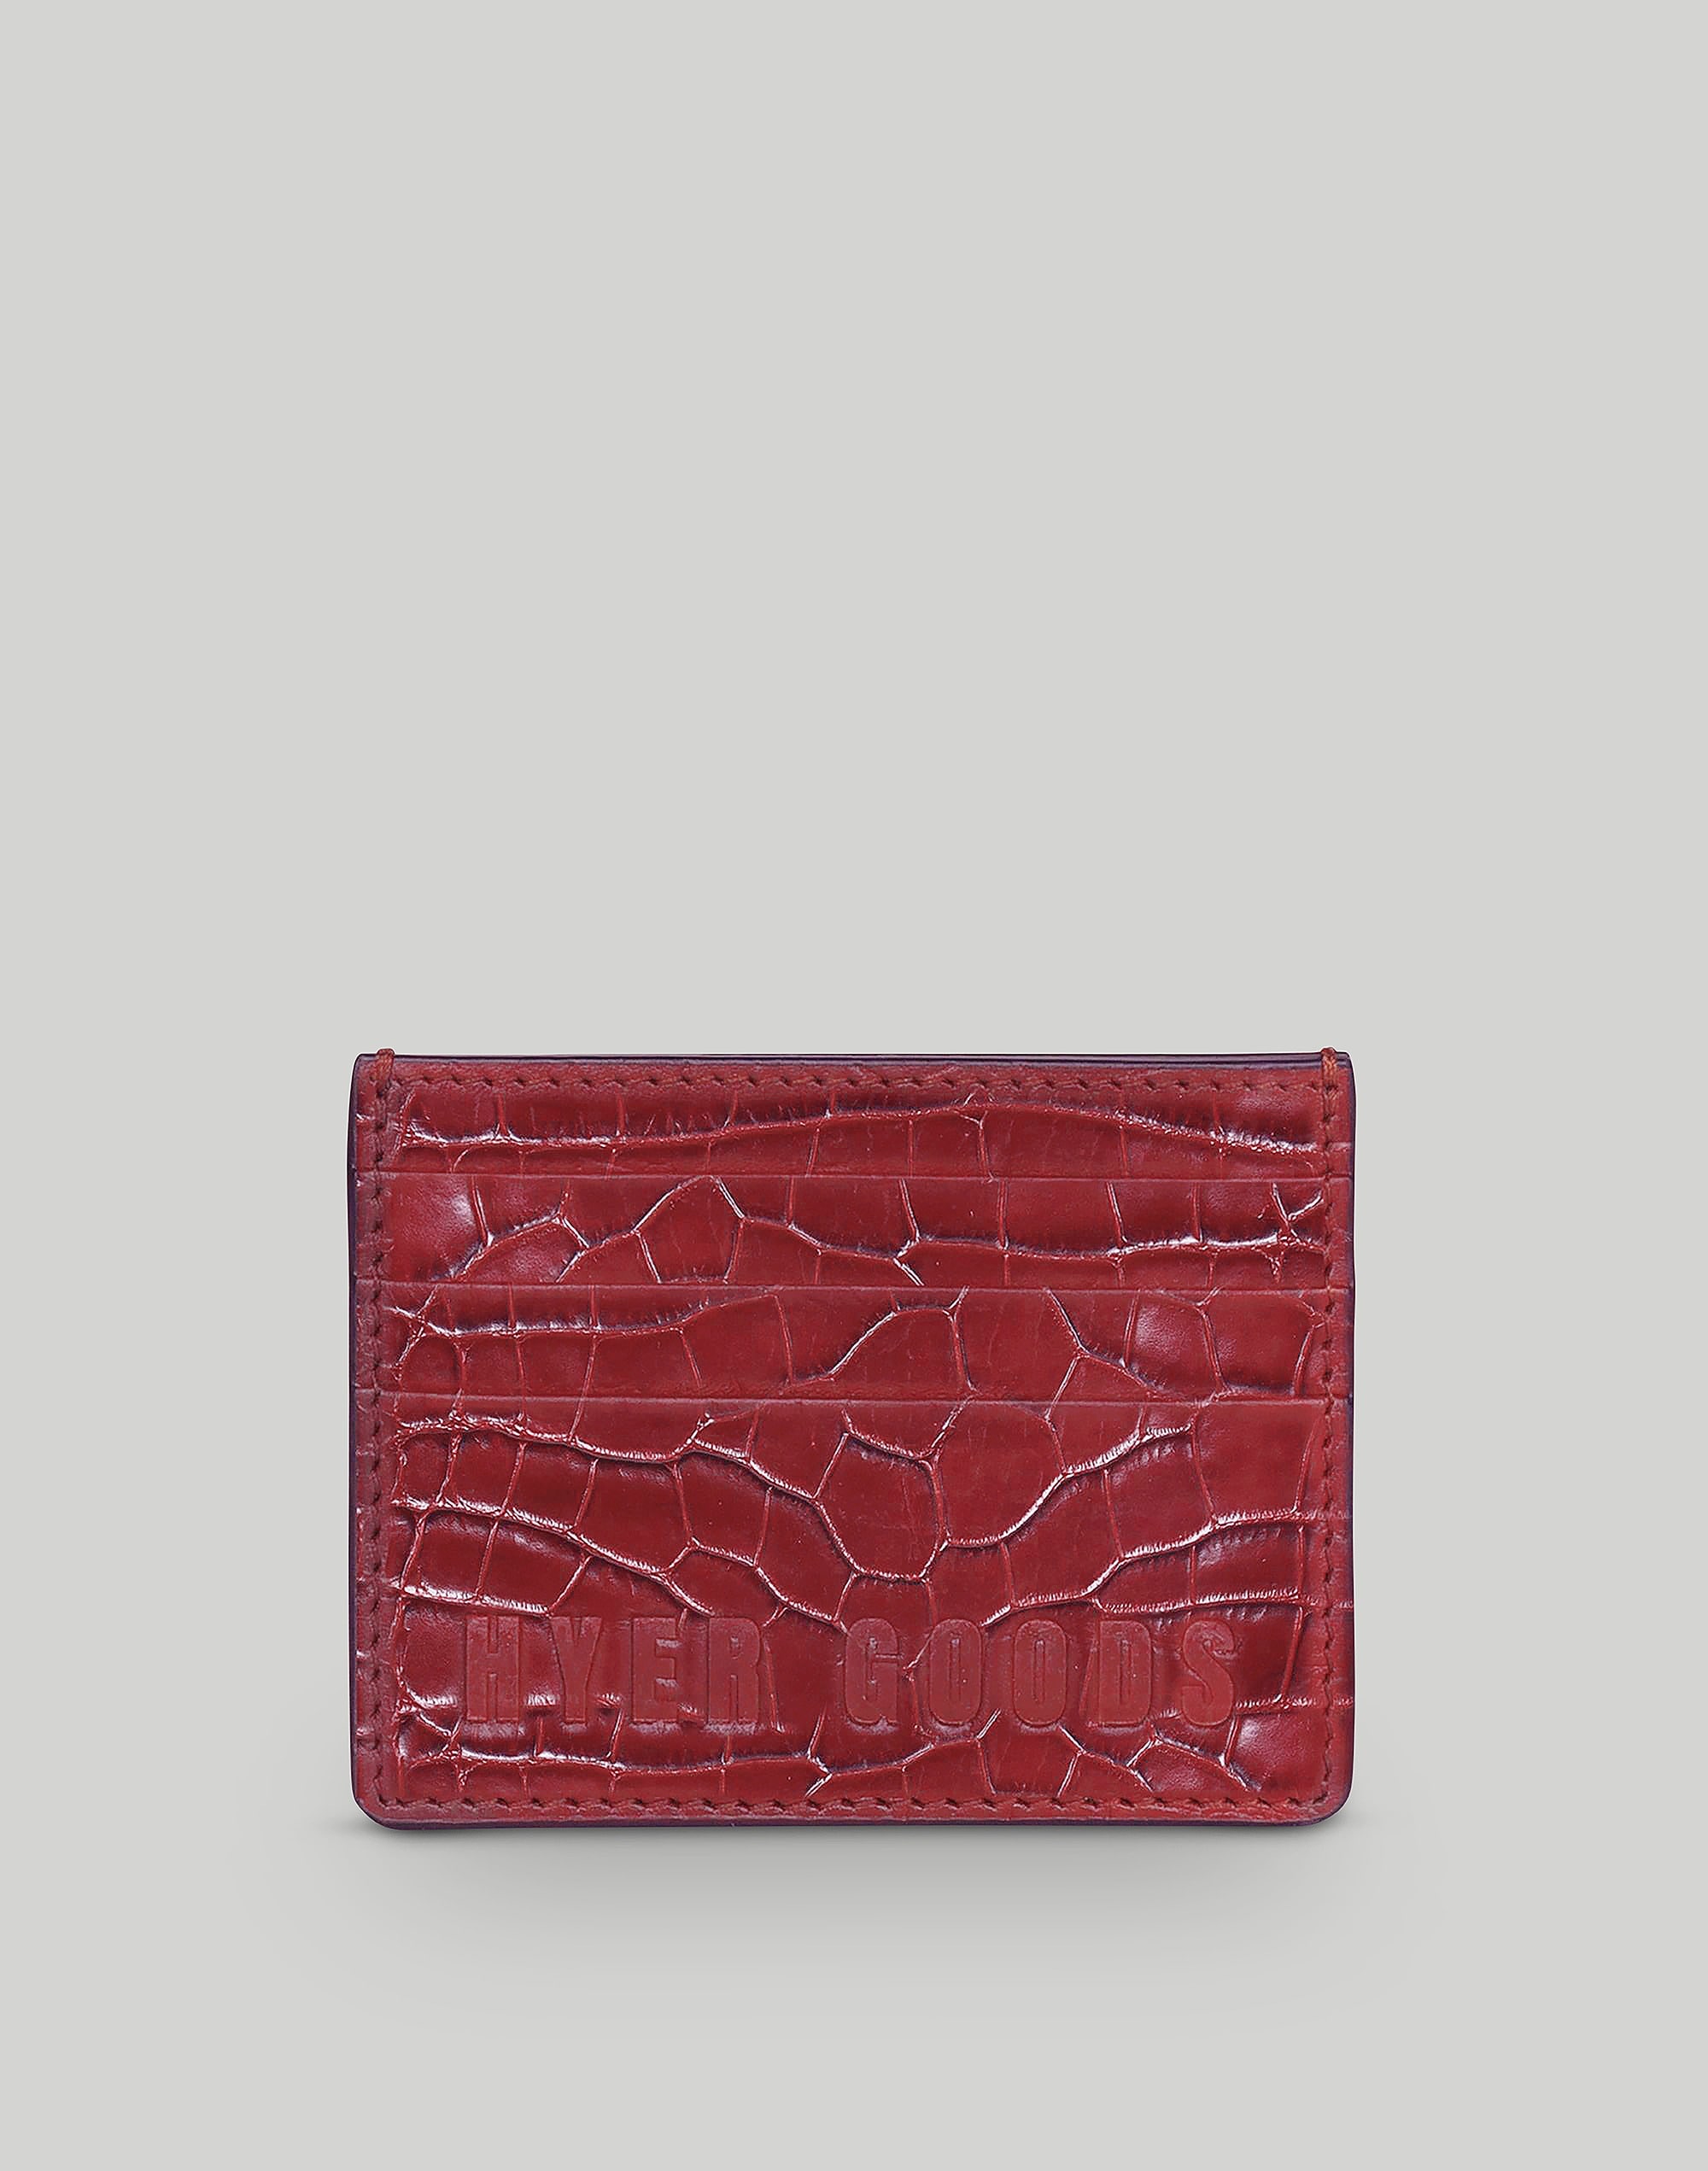 Mw Hyer Goods Luxe Card Wallet In Burgundy